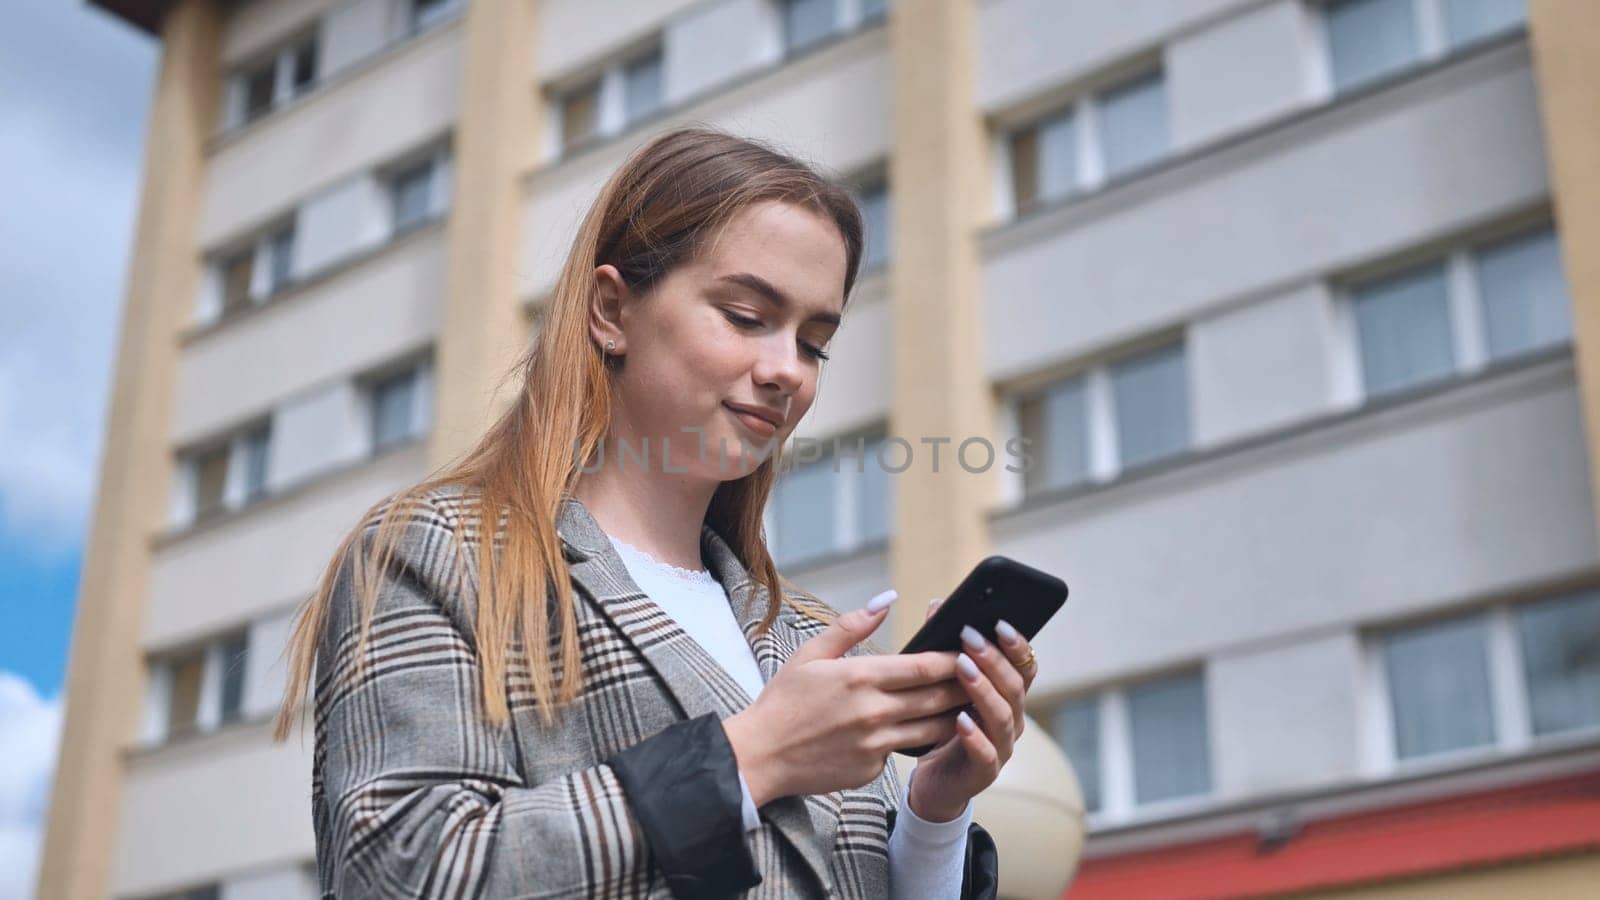 A girl walks through town and looks at her smartphone